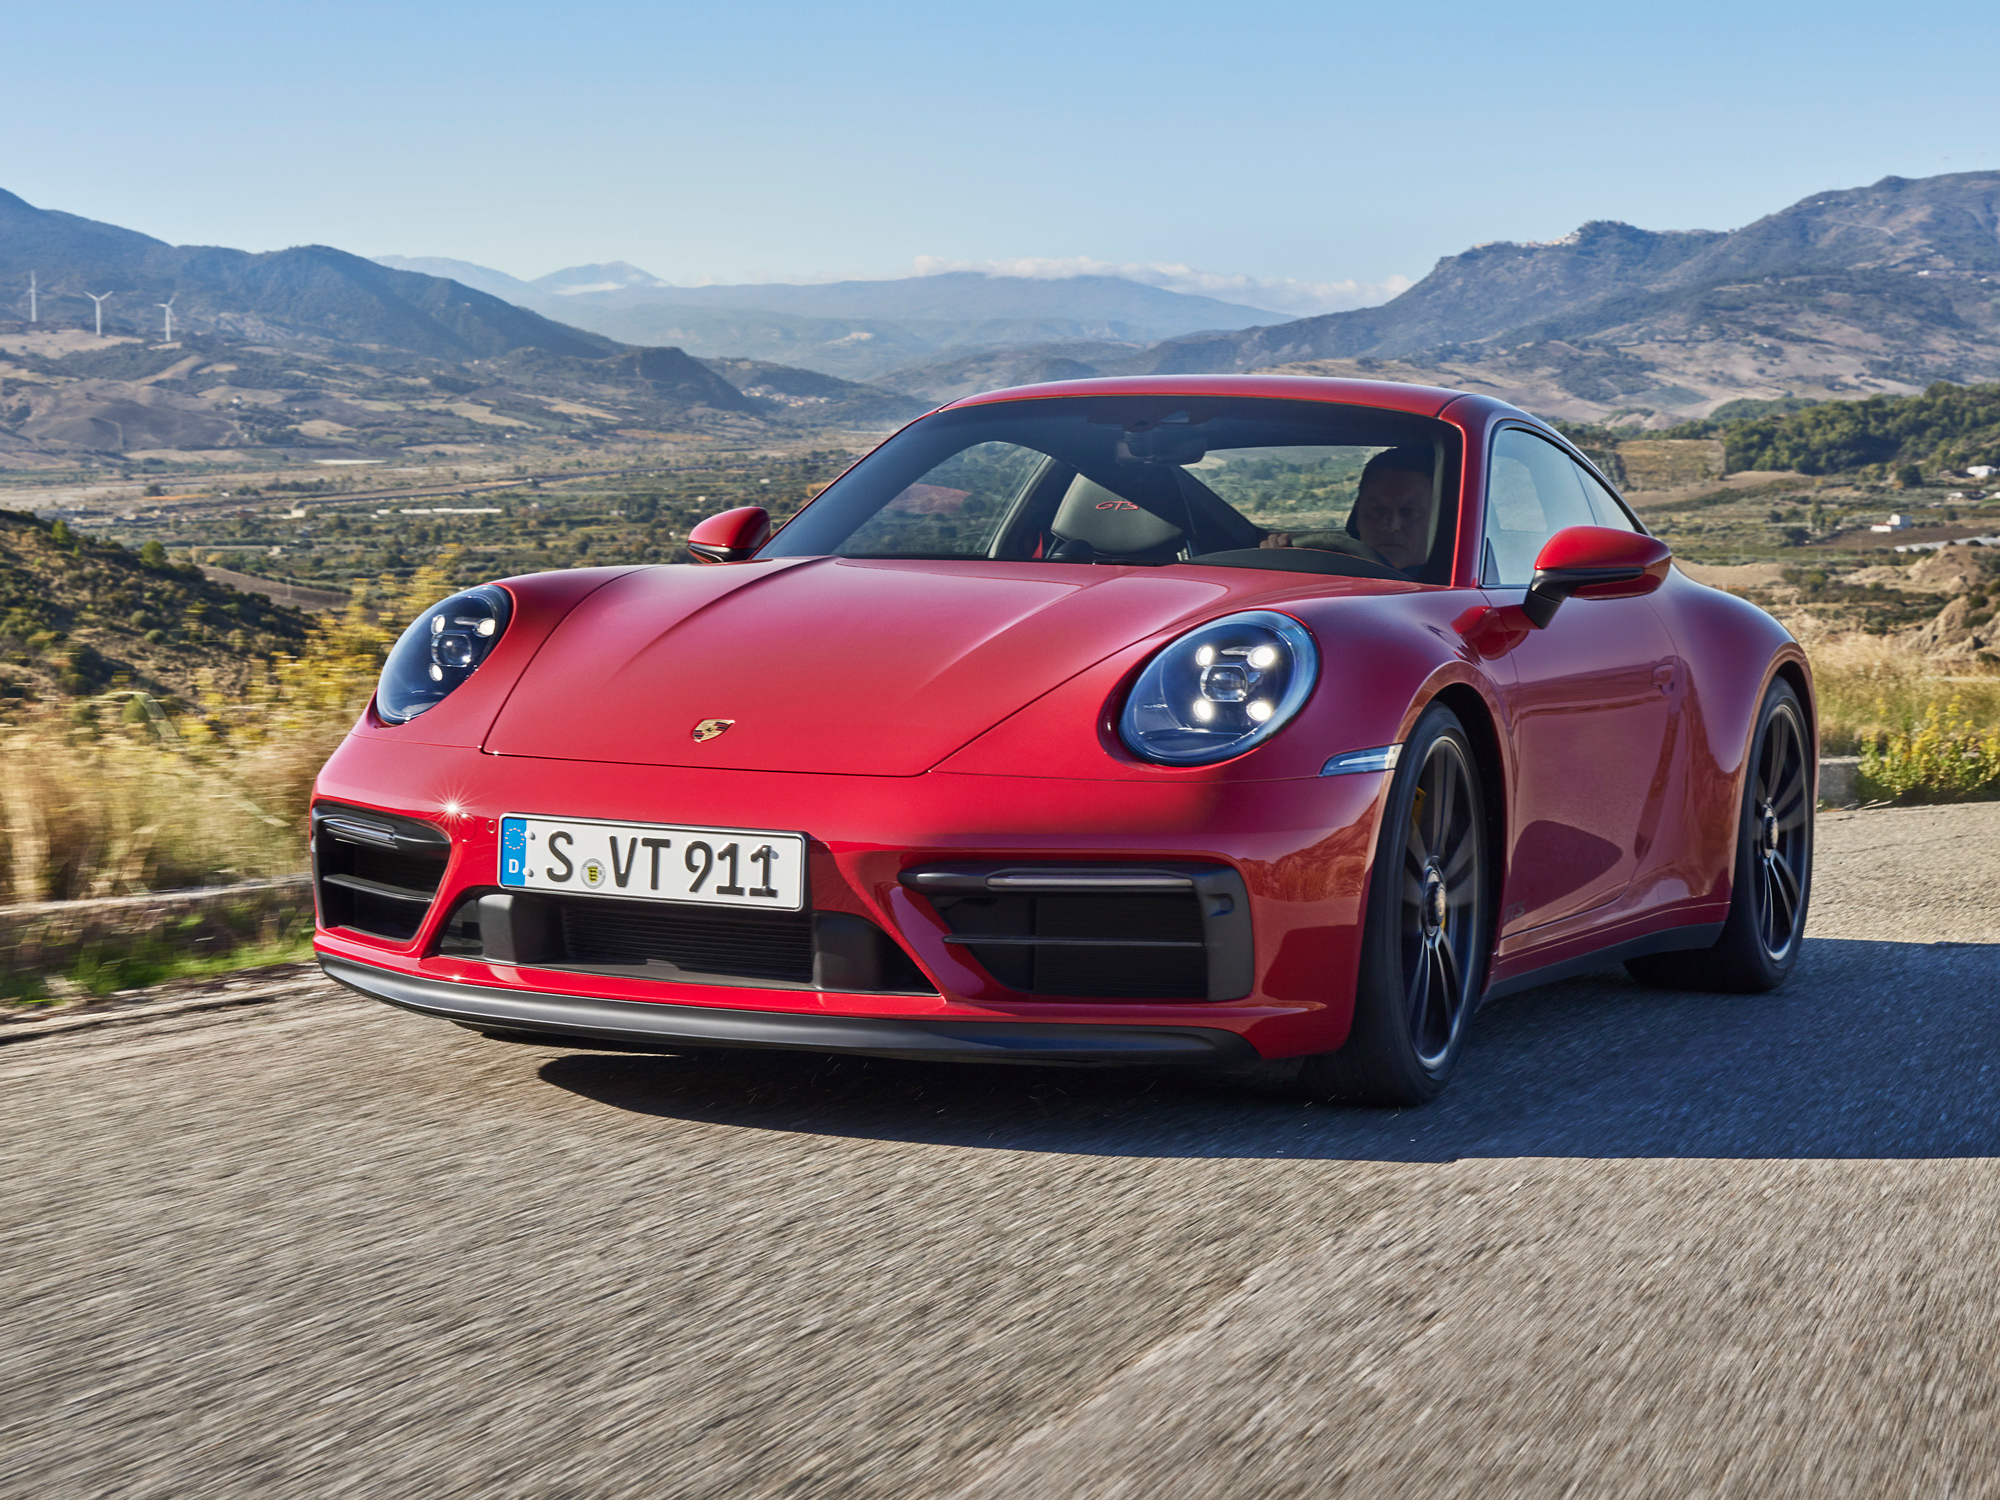 Porsche's Pitch to Purists: A Battery-Powered 911 Isn't Planned - Bloomberg